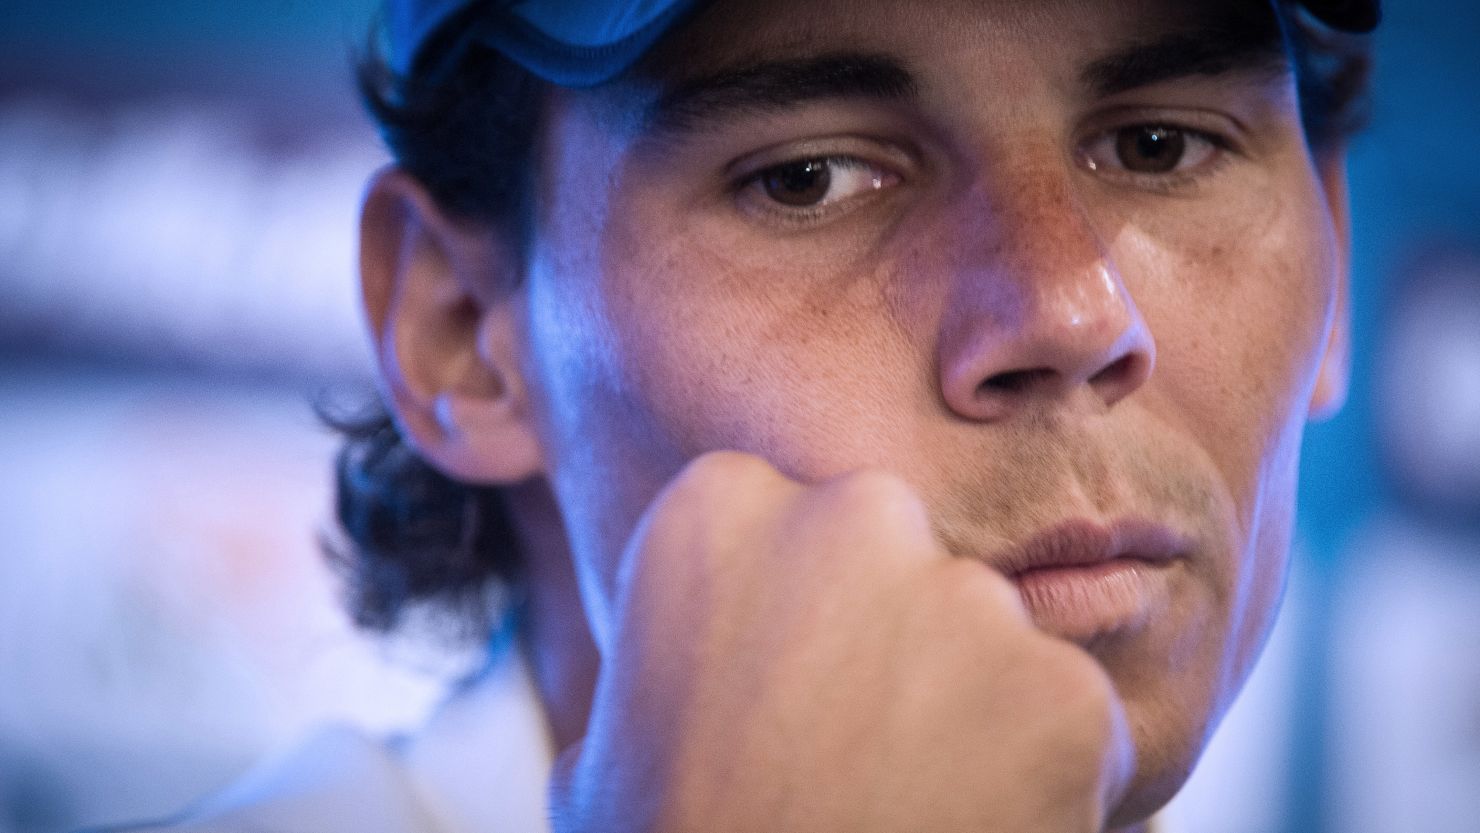 Rafa Nadal's contention that hardcourts are damaging players health isn't backed up by evidence, says a UK sports scientist.